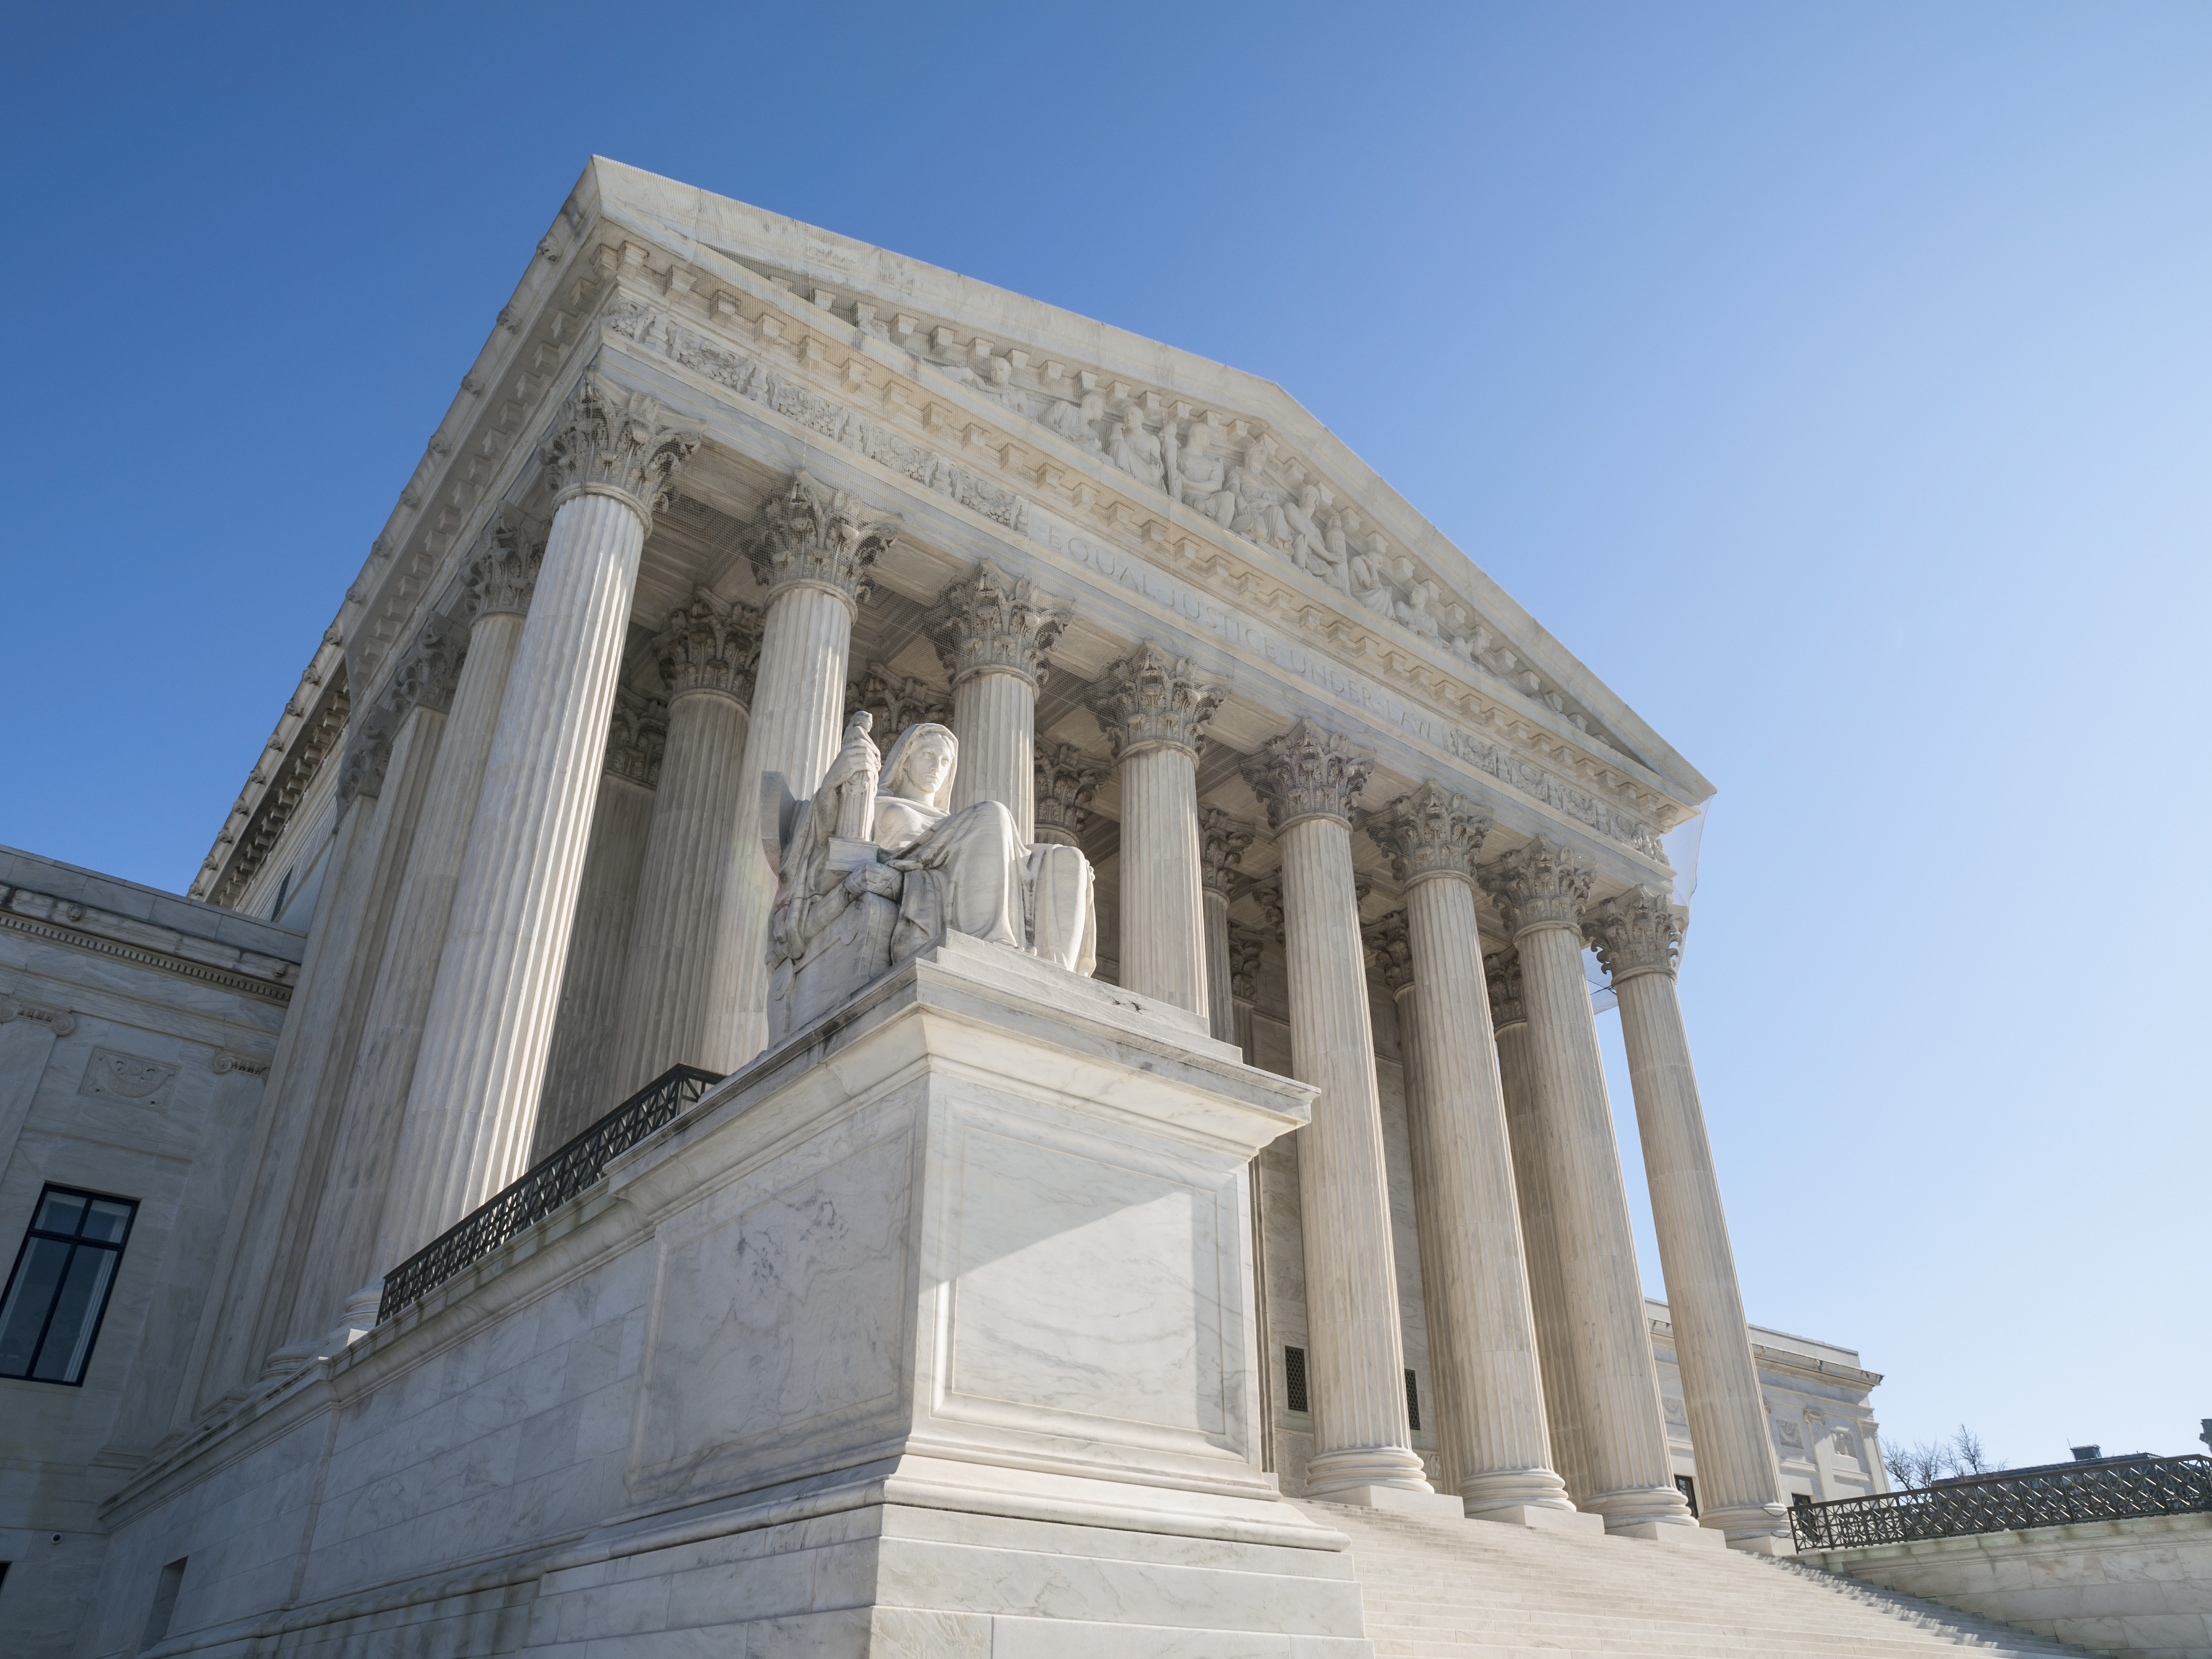  Supremes sets threshold for sentencing repeat violent offenders to prison terms